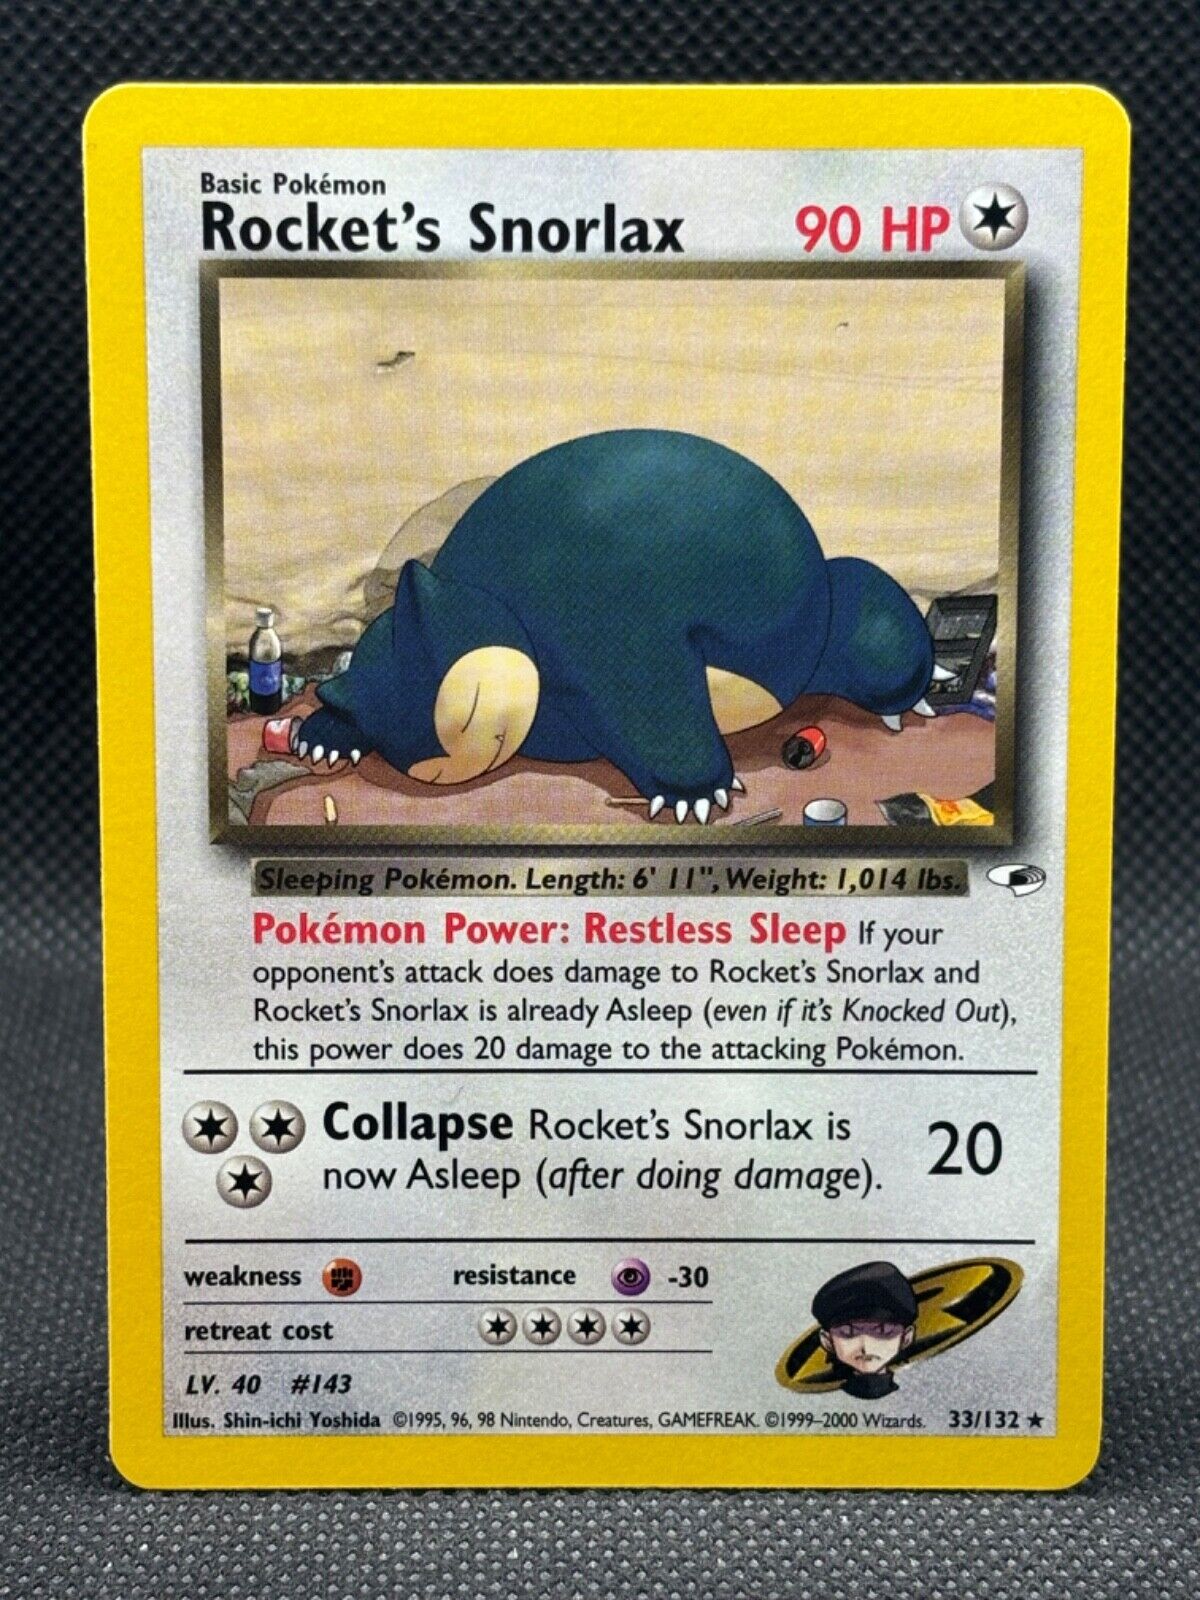 2000 Pokémon TCG Card Rocket's Snorlax 33/132 Non Holo Rare Unlimited Gym Heroes